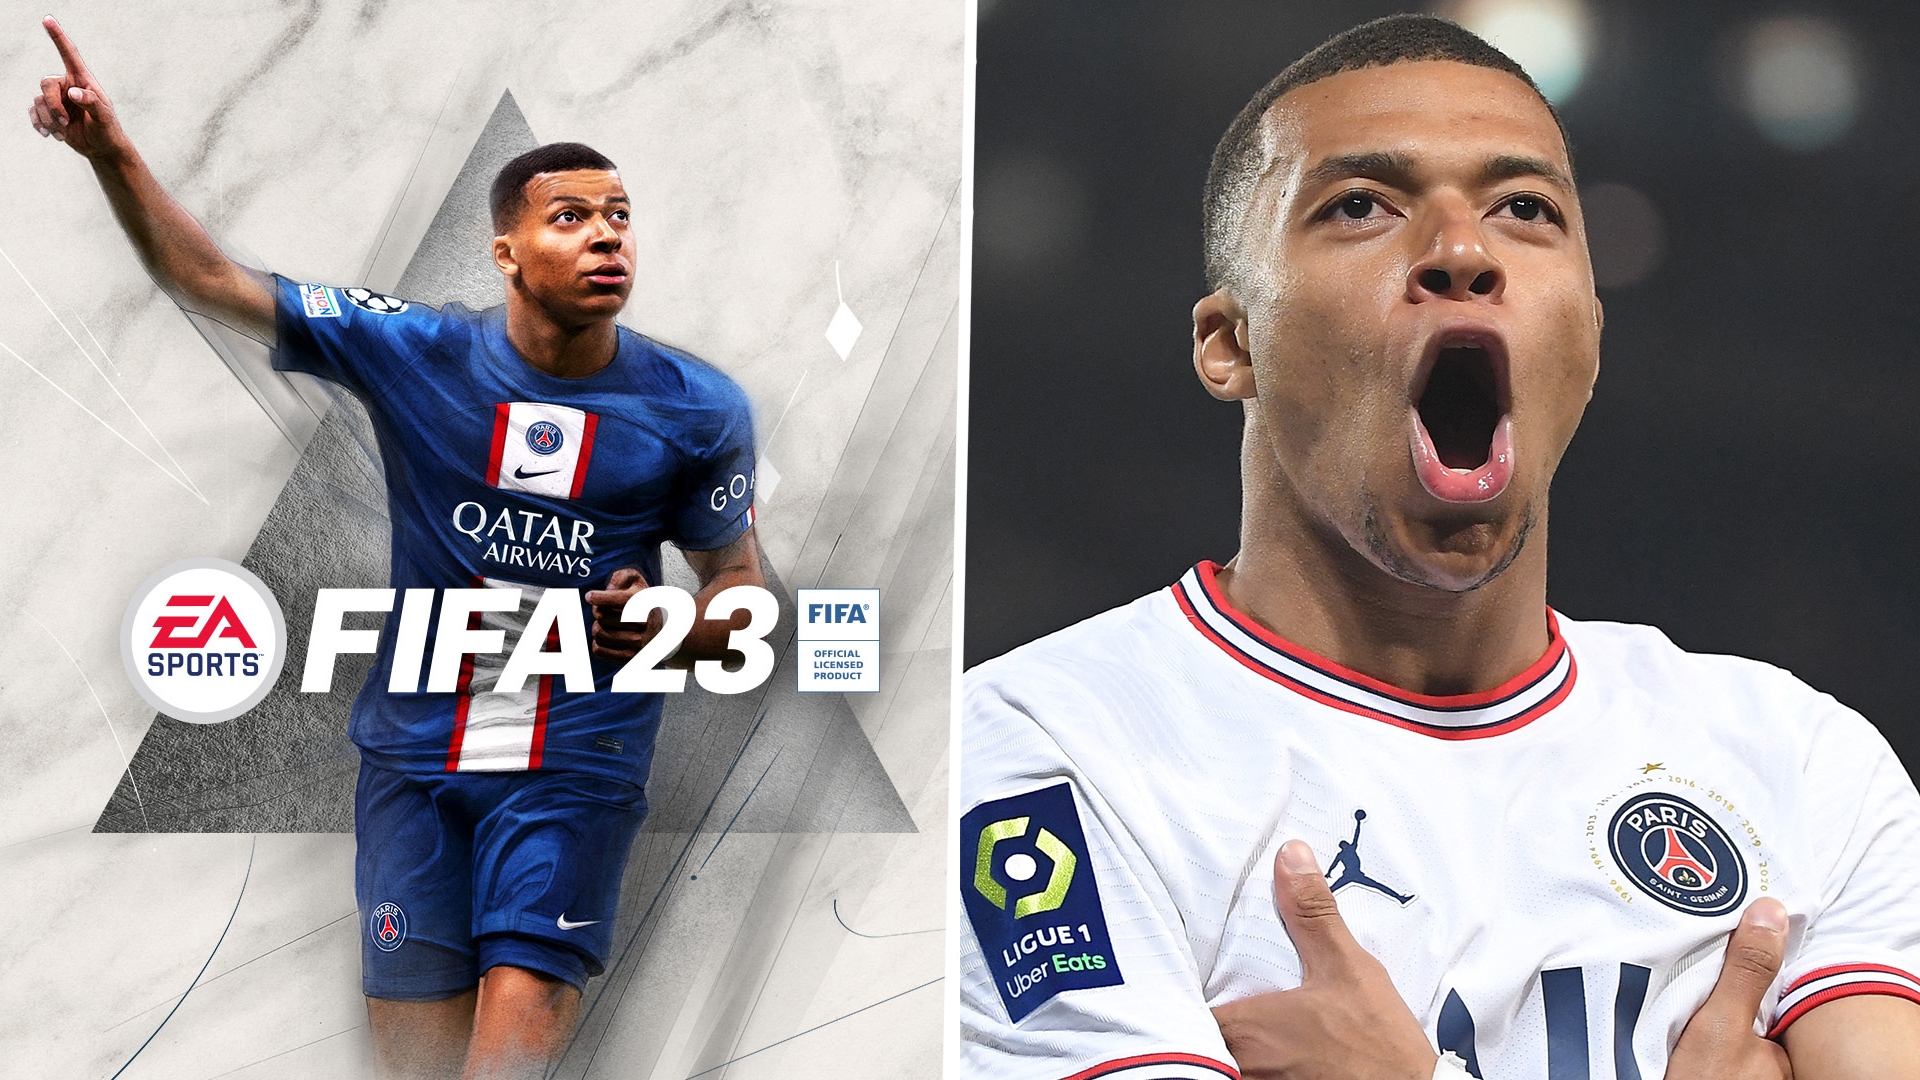 Kylian Mbappe FIFA 22 Game Wallpapers